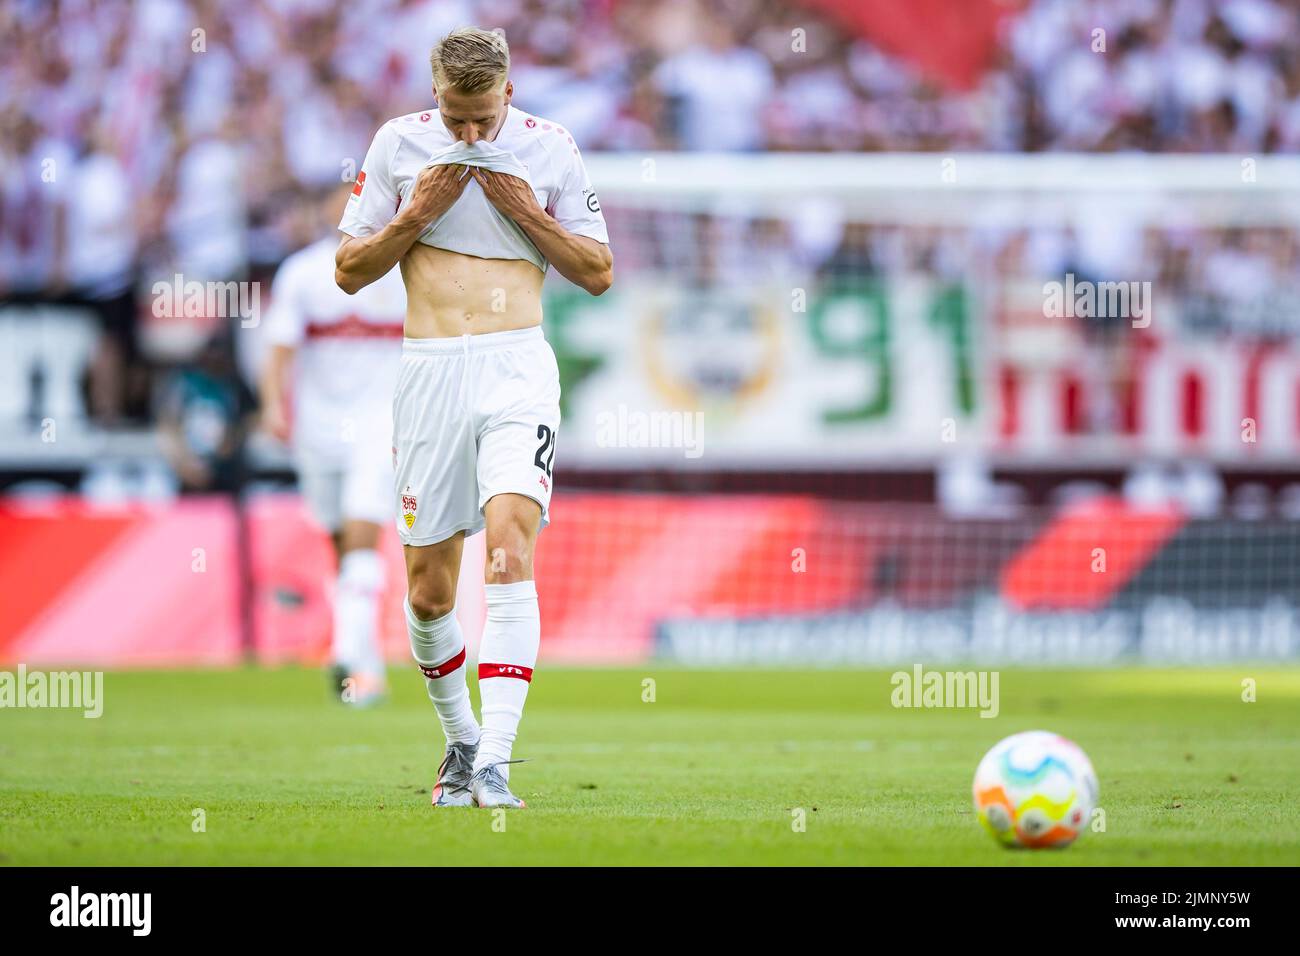 Stuttgart, Germany. 07th Aug, 2022. Soccer: Bundesliga, VfB Stuttgart - RB Leipzig, Matchday 1, Mercedes-Benz Arena. Stuttgart's Chris Führich reacts in the match. Credit: Tom Weller/dpa - IMPORTANT NOTE: In accordance with the requirements of the DFL Deutsche Fußball Liga and the DFB Deutscher Fußball-Bund, it is prohibited to use or have used photographs taken in the stadium and/or of the match in the form of sequence pictures and/or video-like photo series./dpa/Alamy Live News Stock Photo